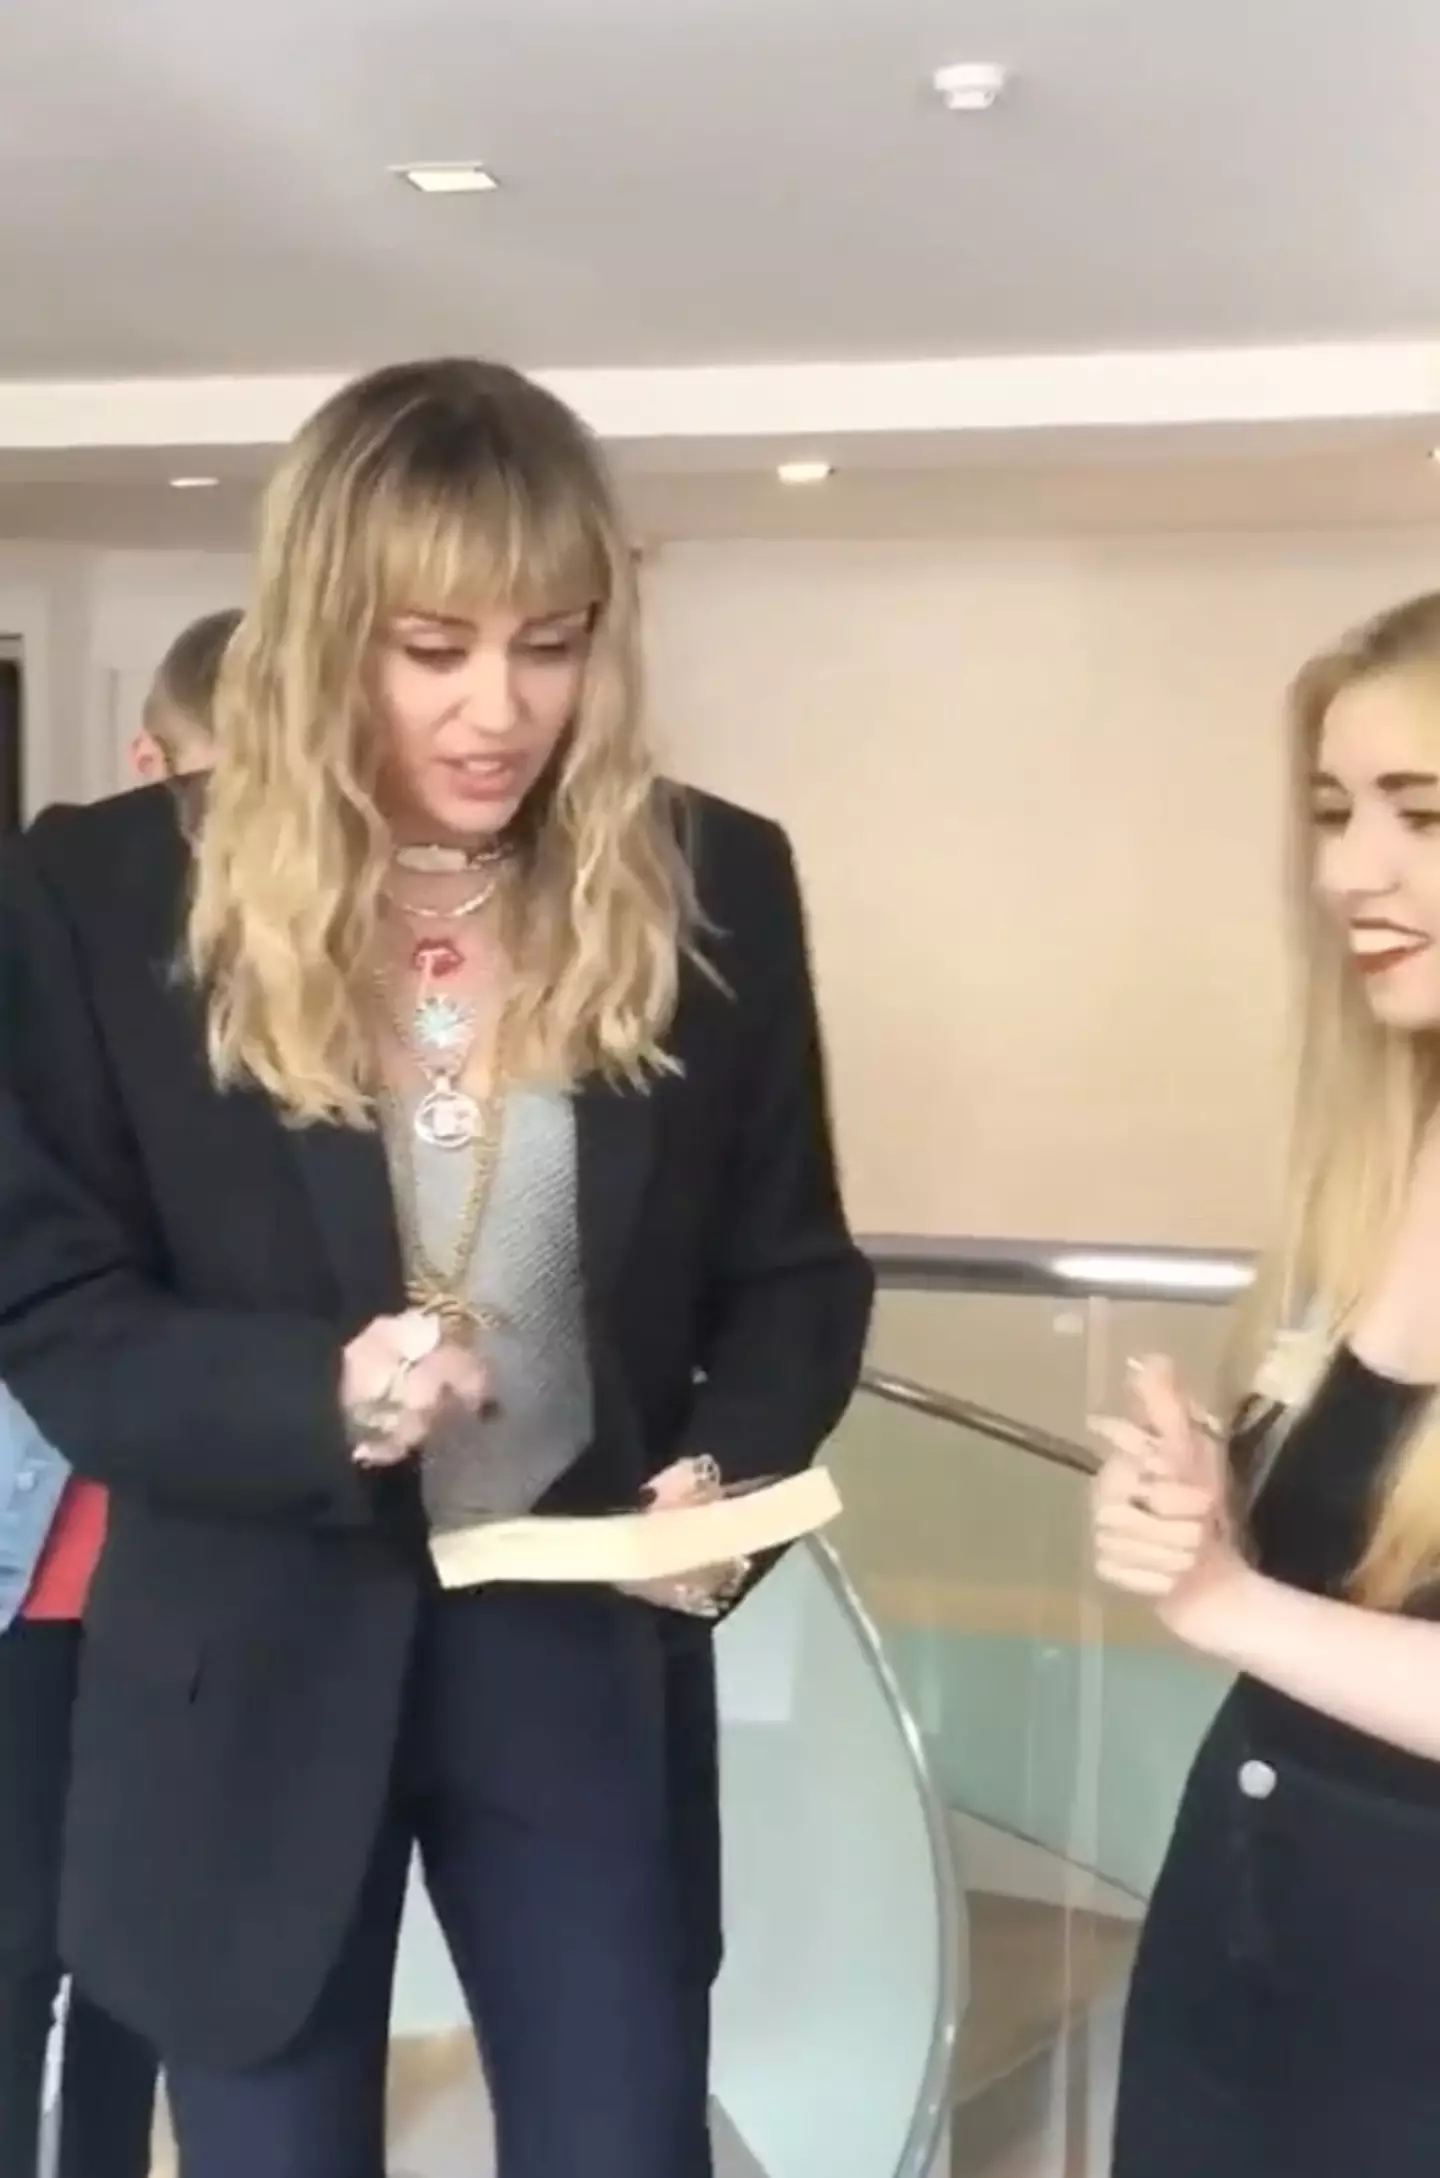 Miley misspoke when she went to sign a fan's copy of The Last Song.